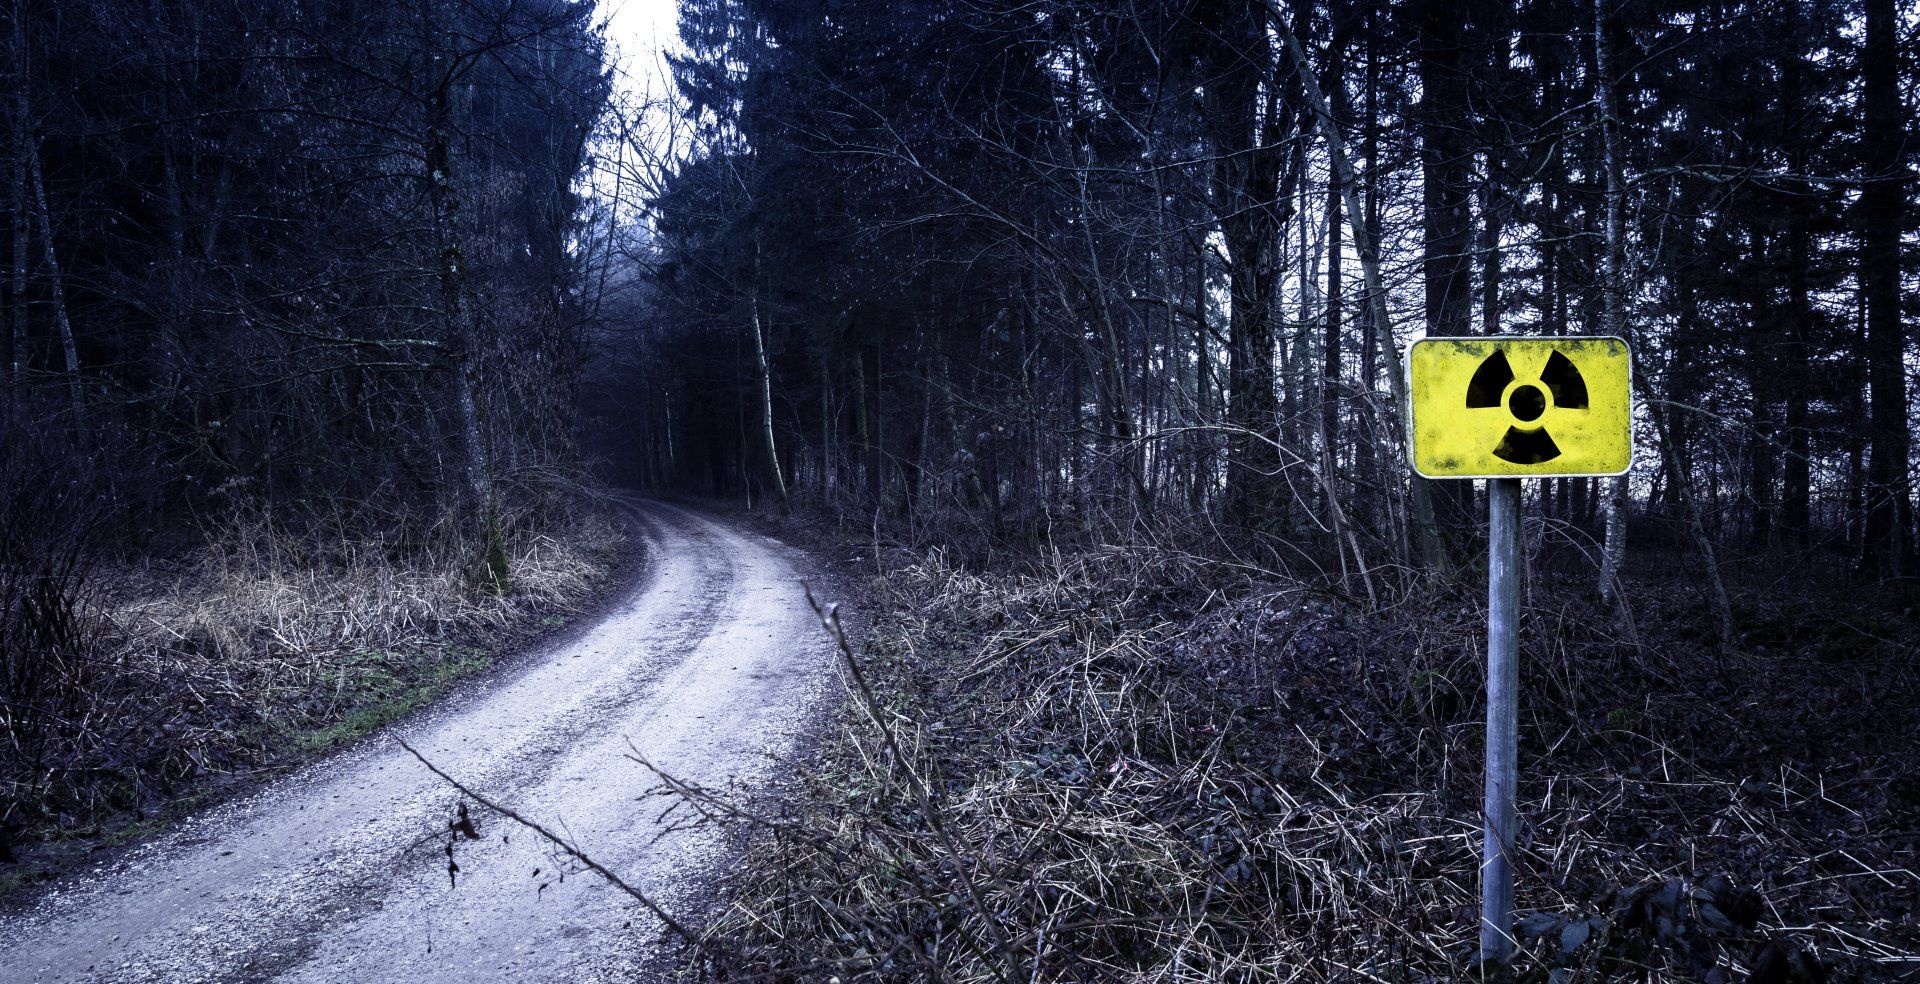 A yellow sign with a nuclear symbol on it is on the side of a dirt road in the woods.